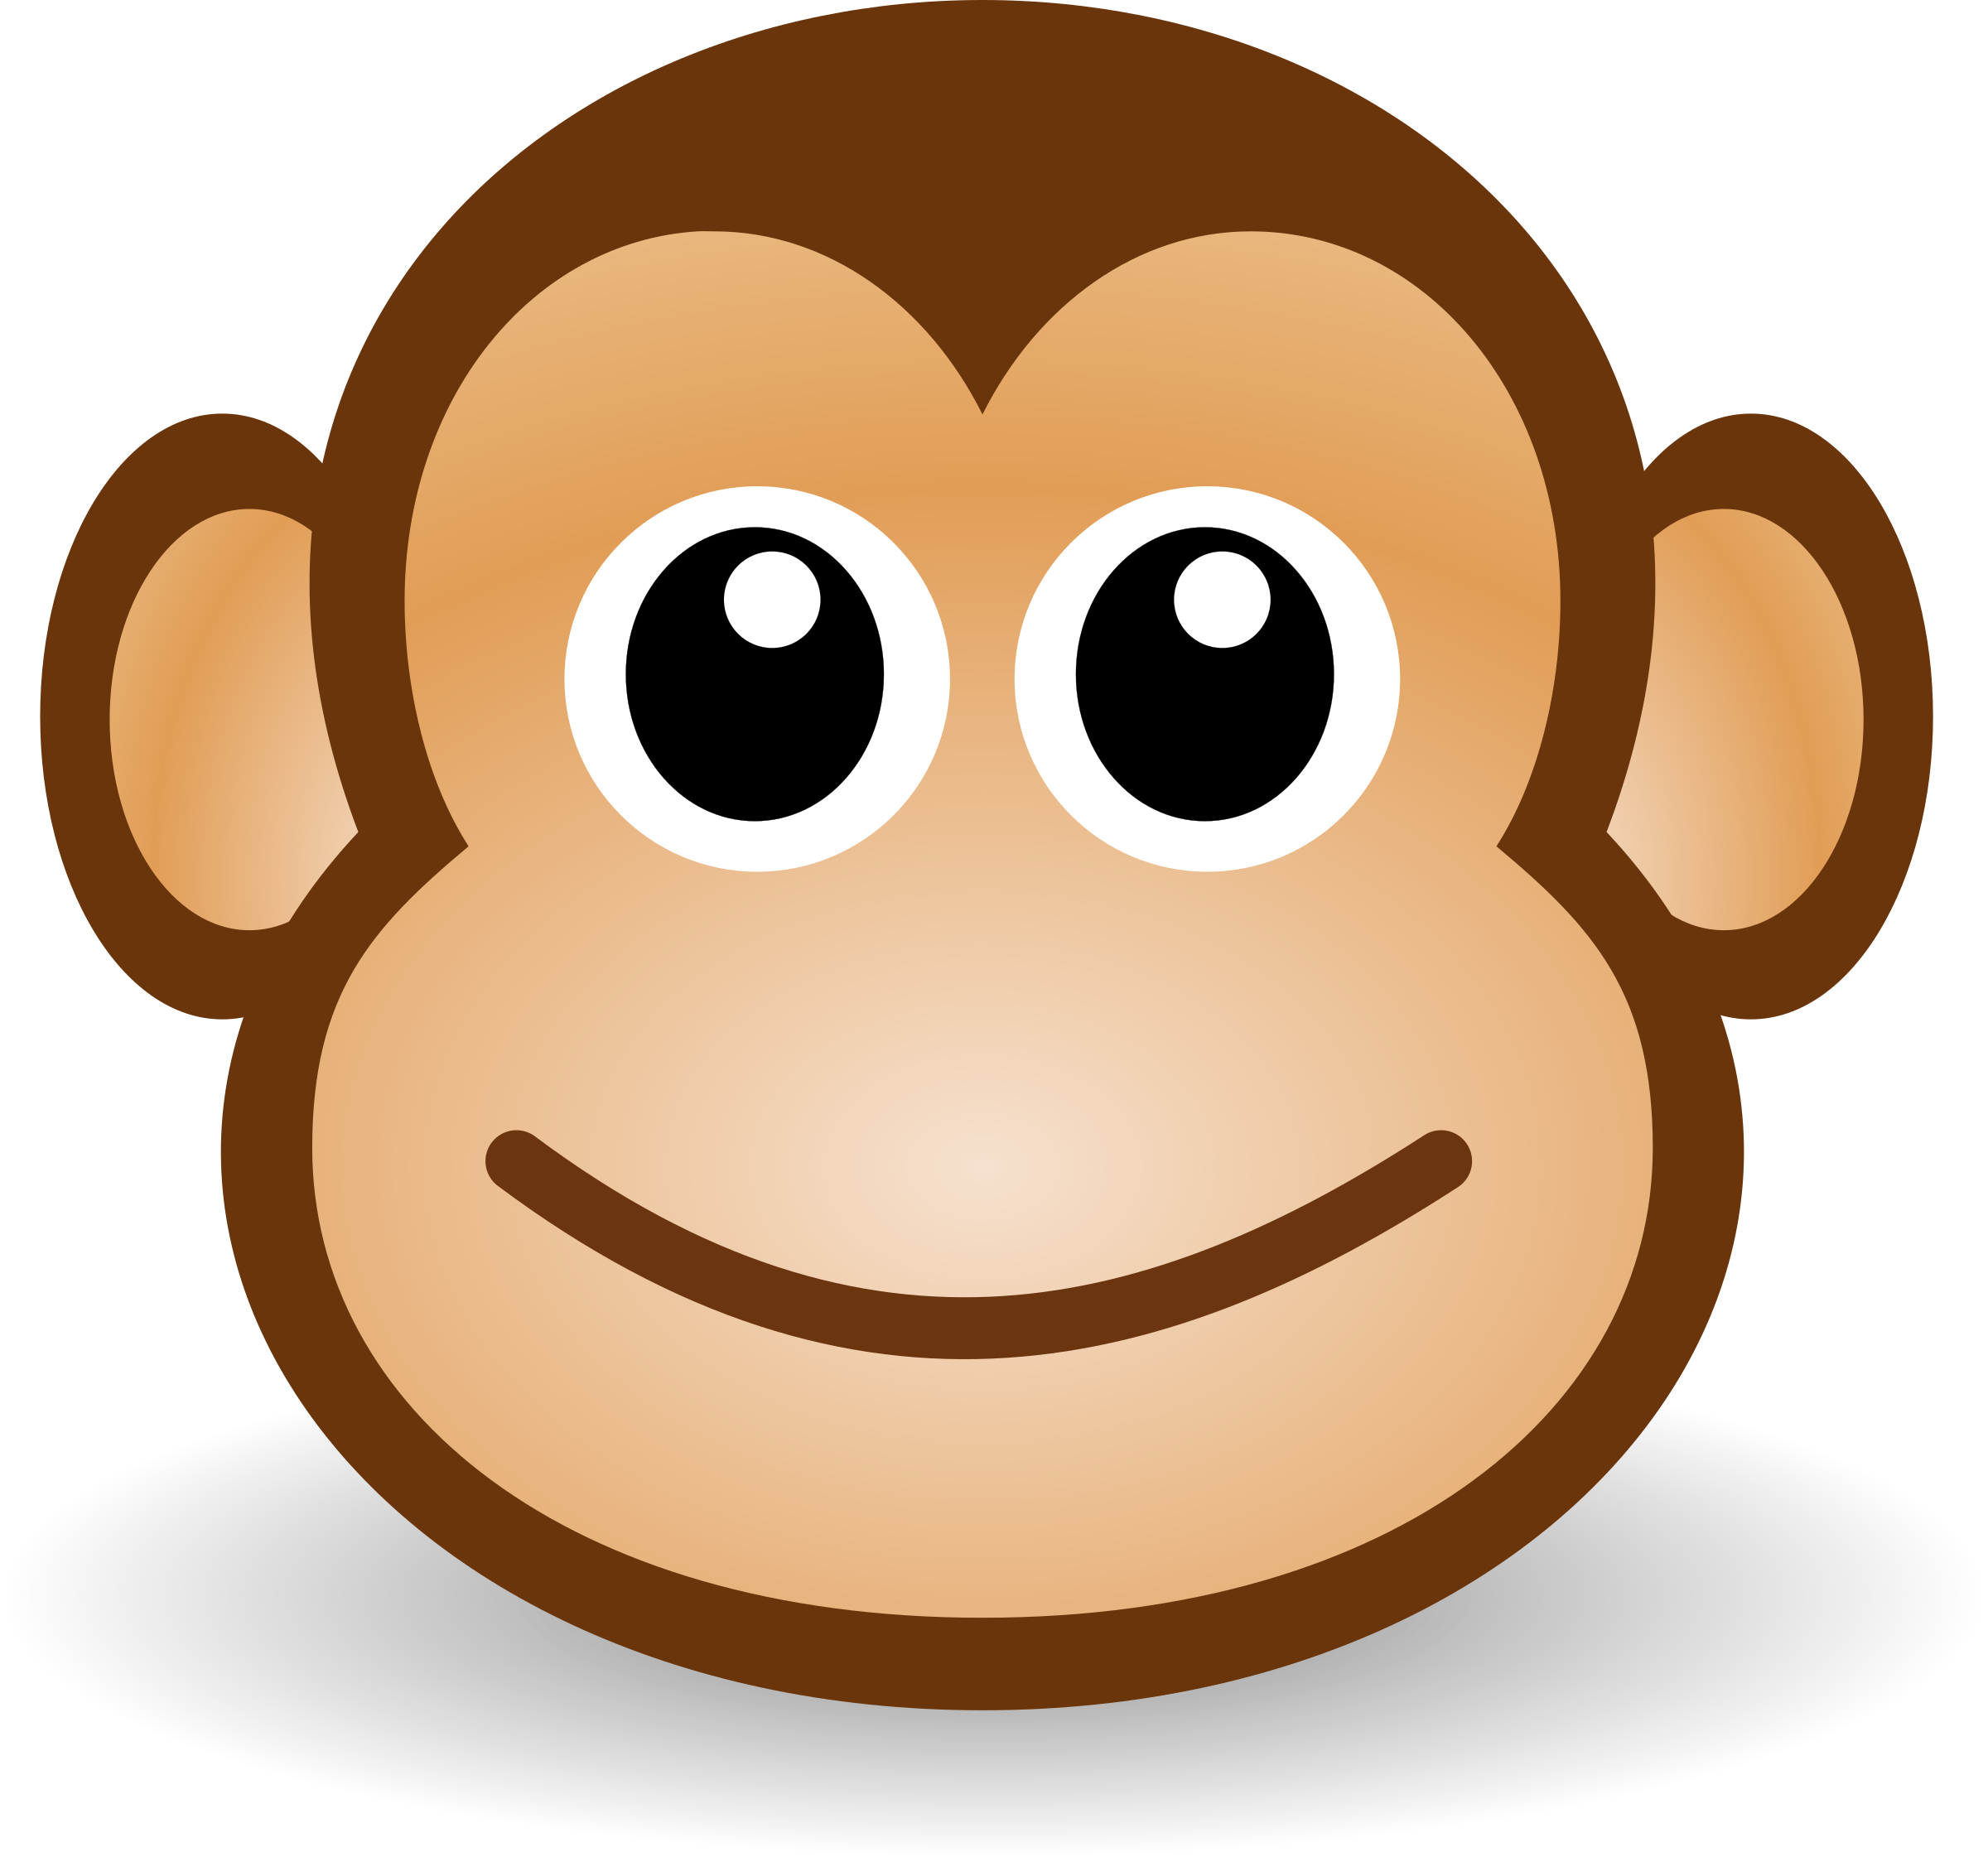 Lion clipart emoji. Funny monkey face by